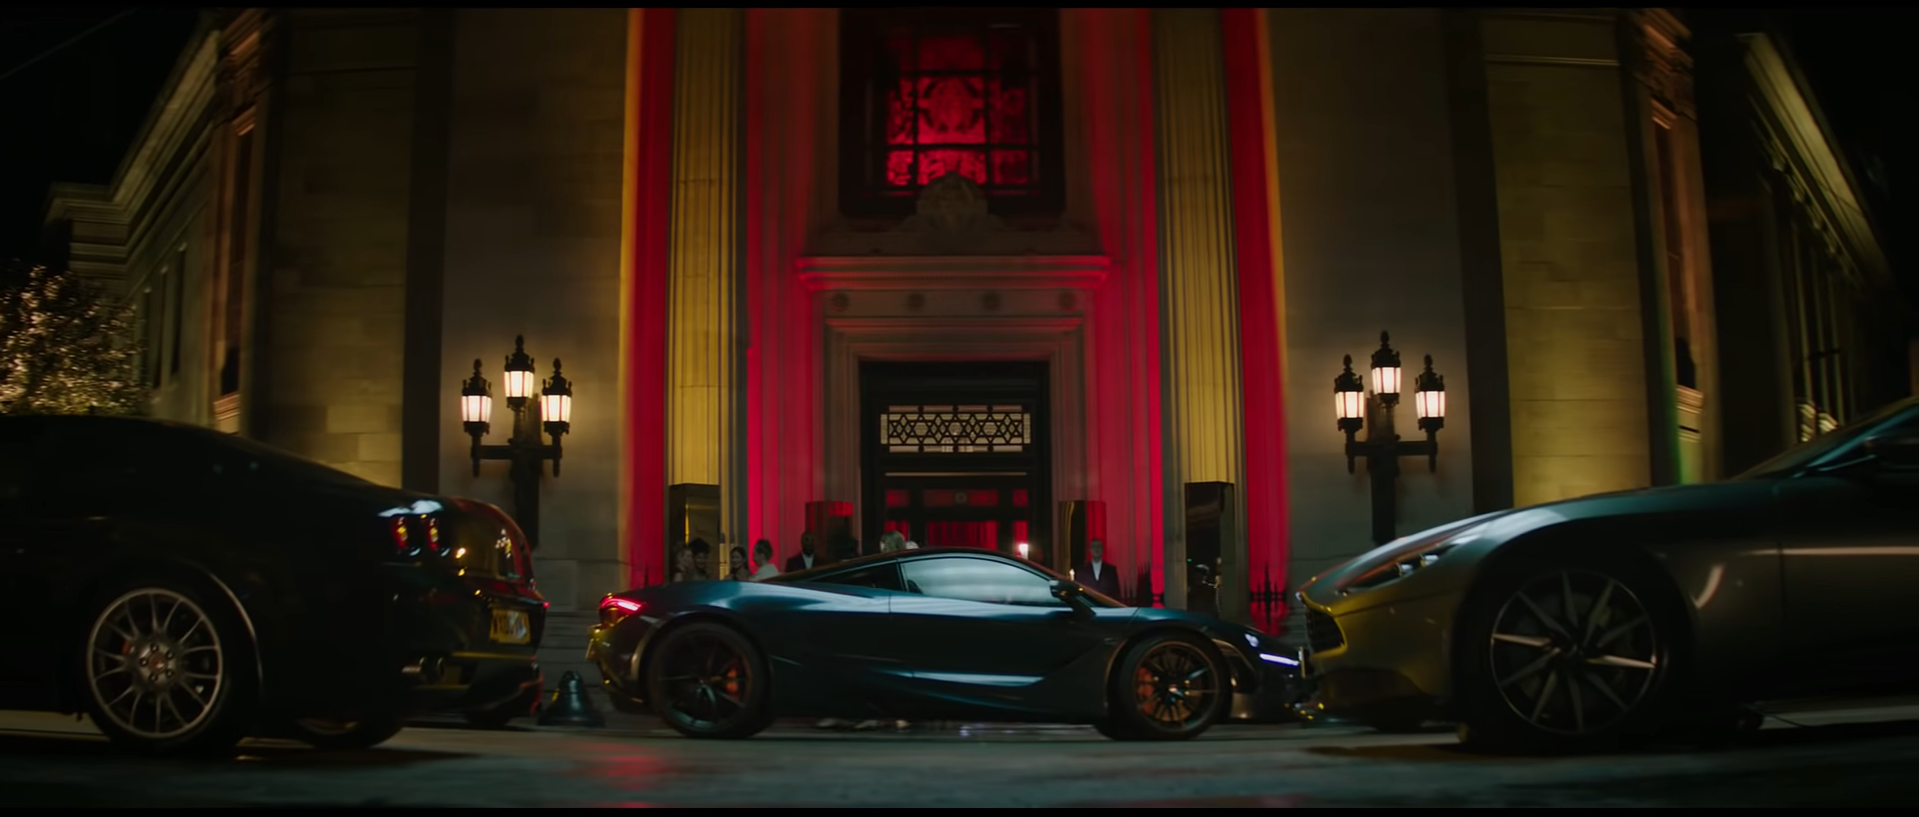 Freemasons’ Hall acted as the exterior for a post nightclub in Fast and Furious: Hobbs & Shaw (2019) (Credits – Seven Bucks Productions. Chris Morgan Productions, Universal Pictures)